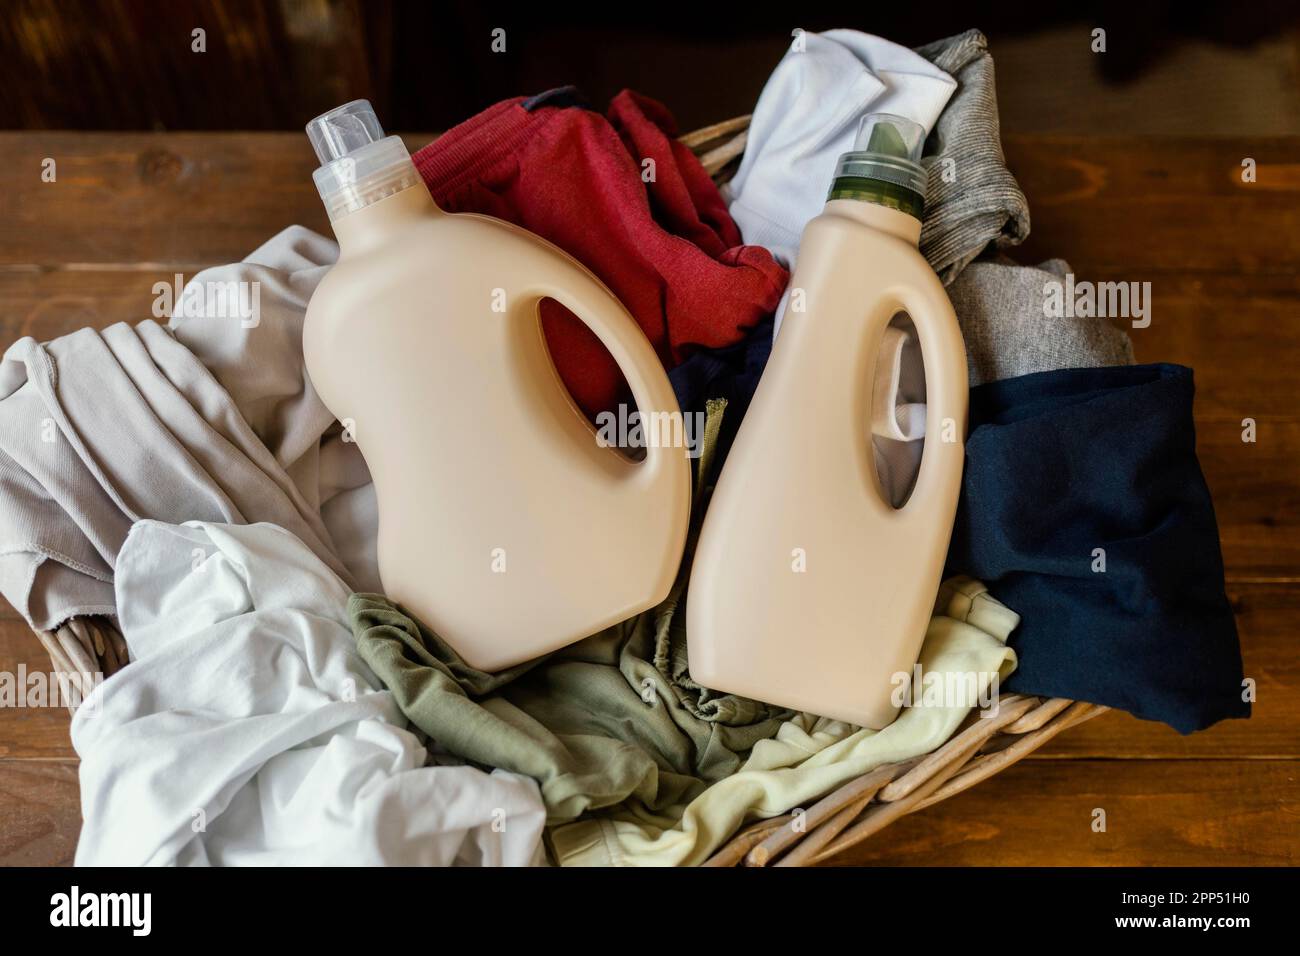 Top view detergent bottles clothes Stock Photo